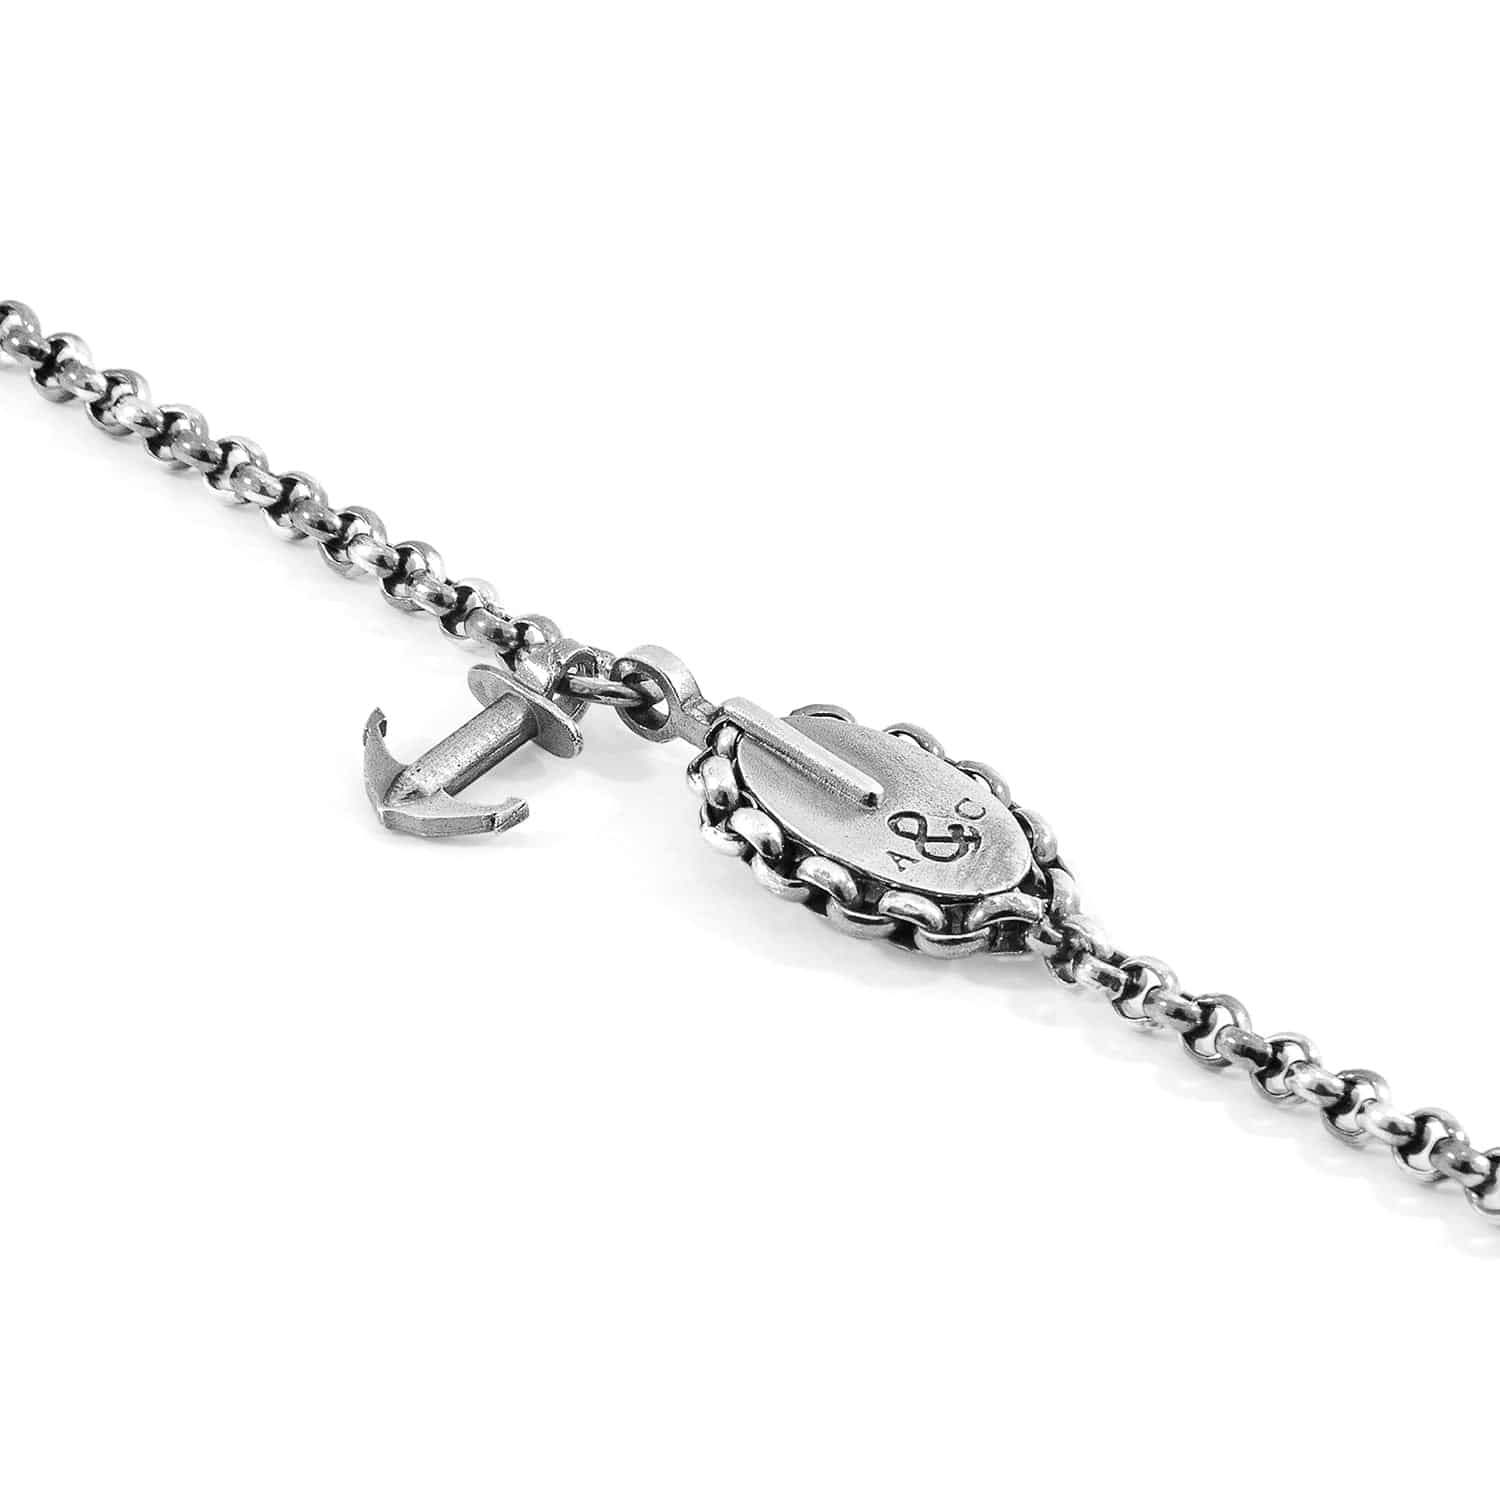 London Mooring Bracelet by Anchor & Crew - Sterling Silver Chain - Vogue J'adore